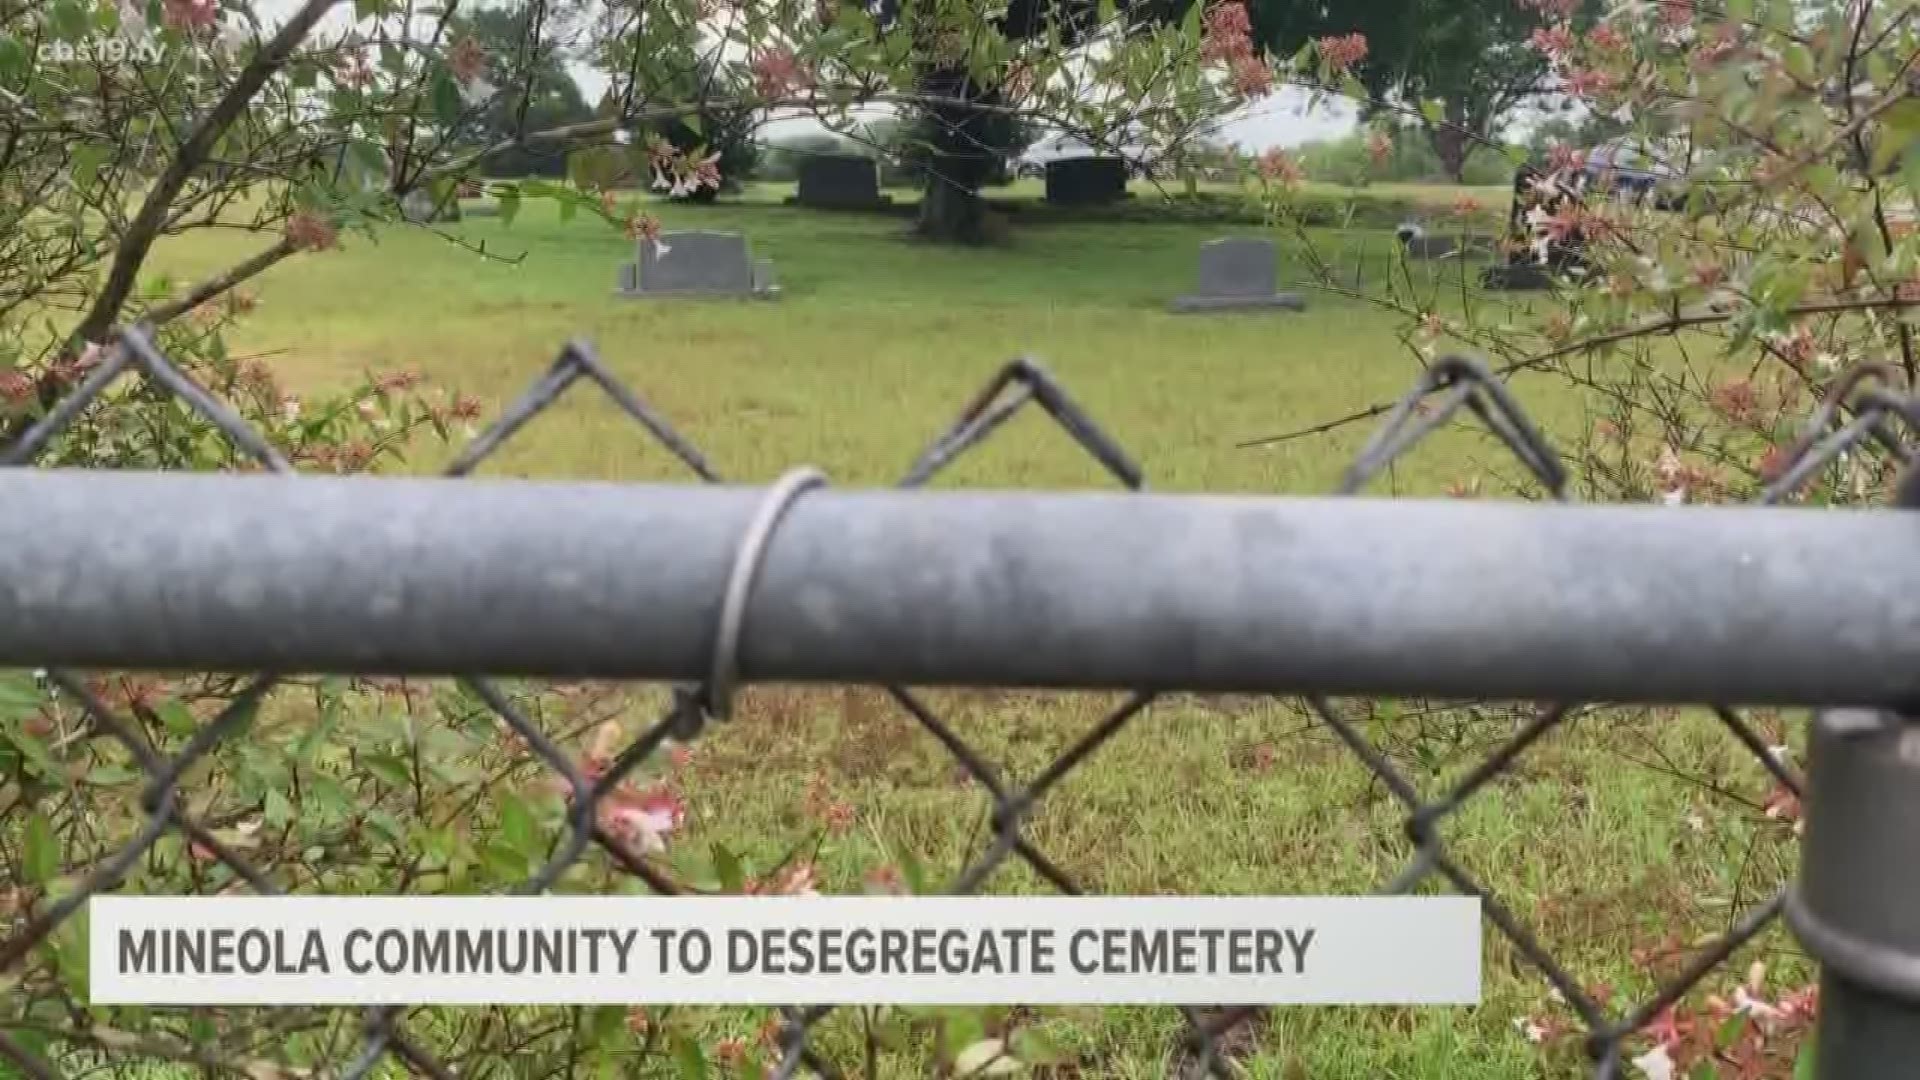 For decades, a fence divided a Mineola cemetery between black and white. Now, the Mineola community is finally removing the symbol of segregation.